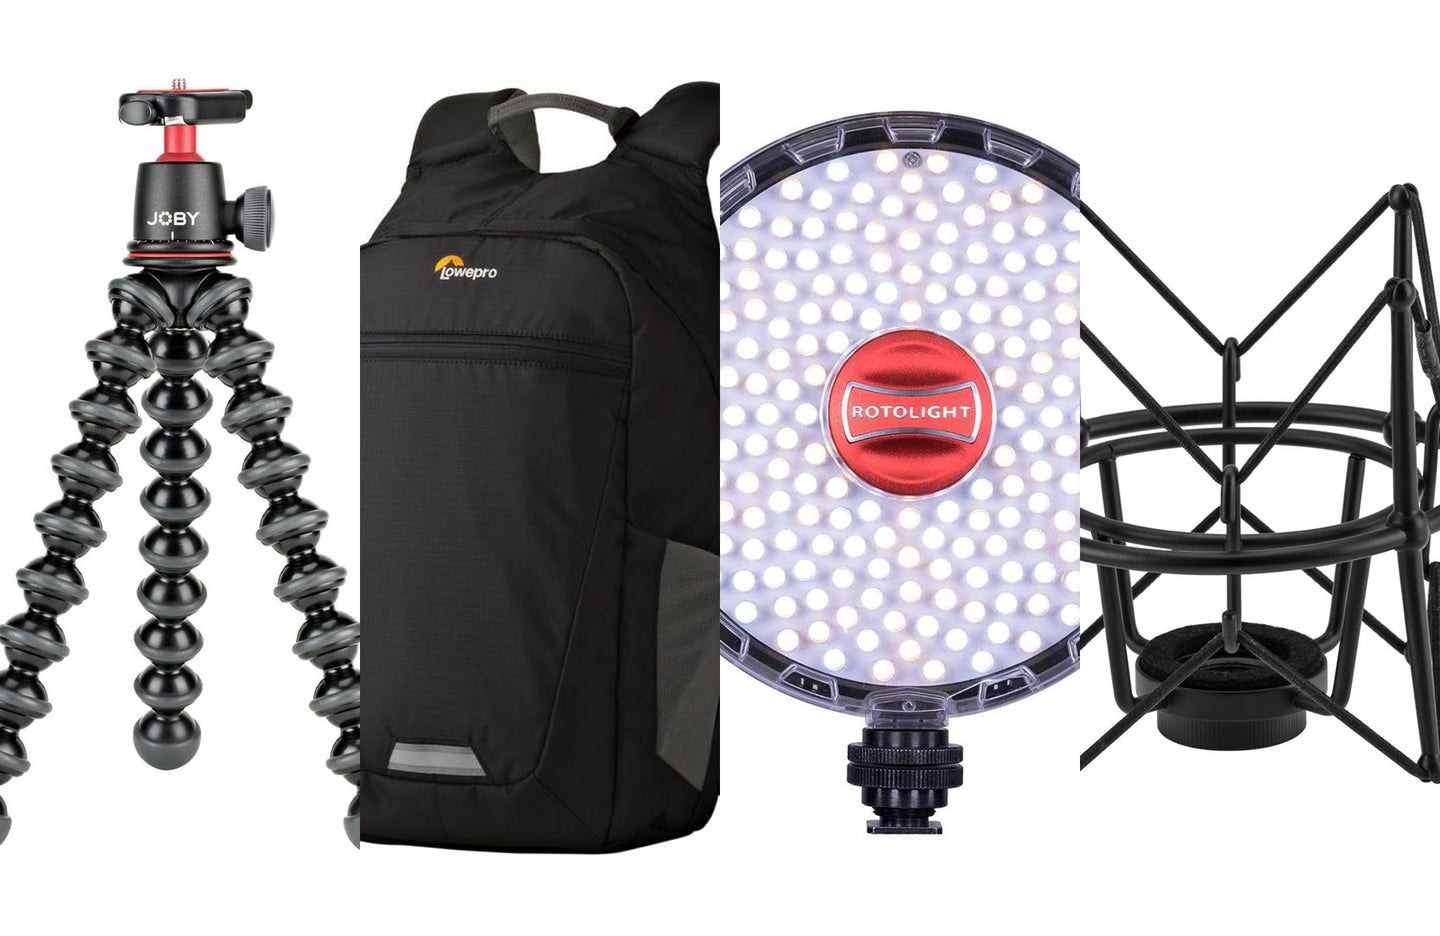 Save on photography accessories at Adorama.